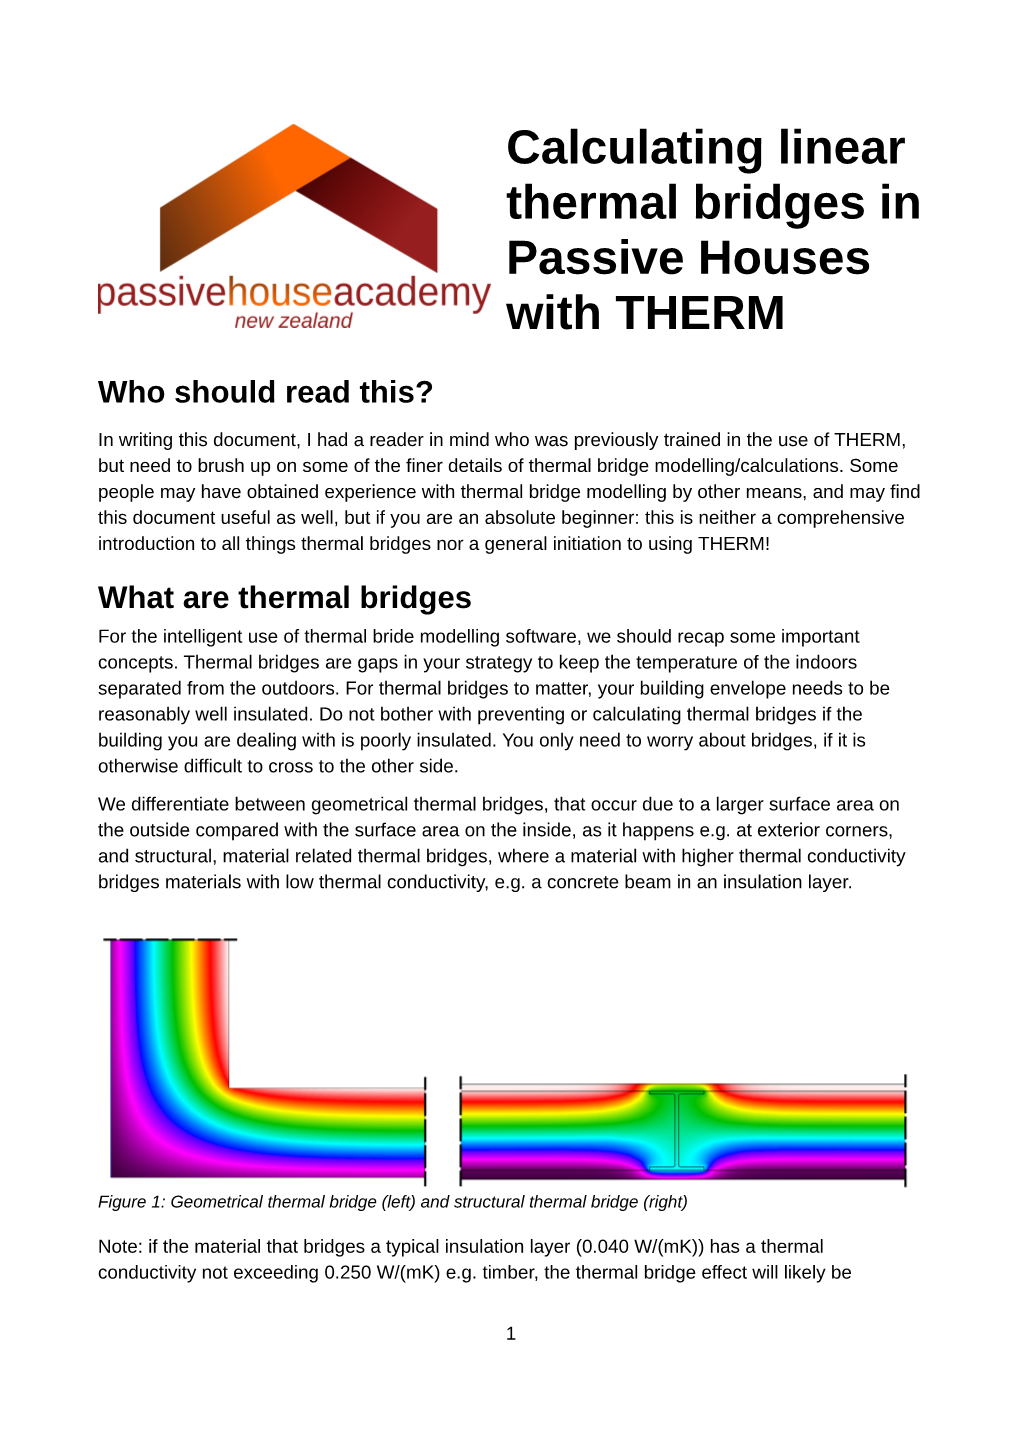 Calculating Linear Thermal Bridges in Passive Houses with THERM